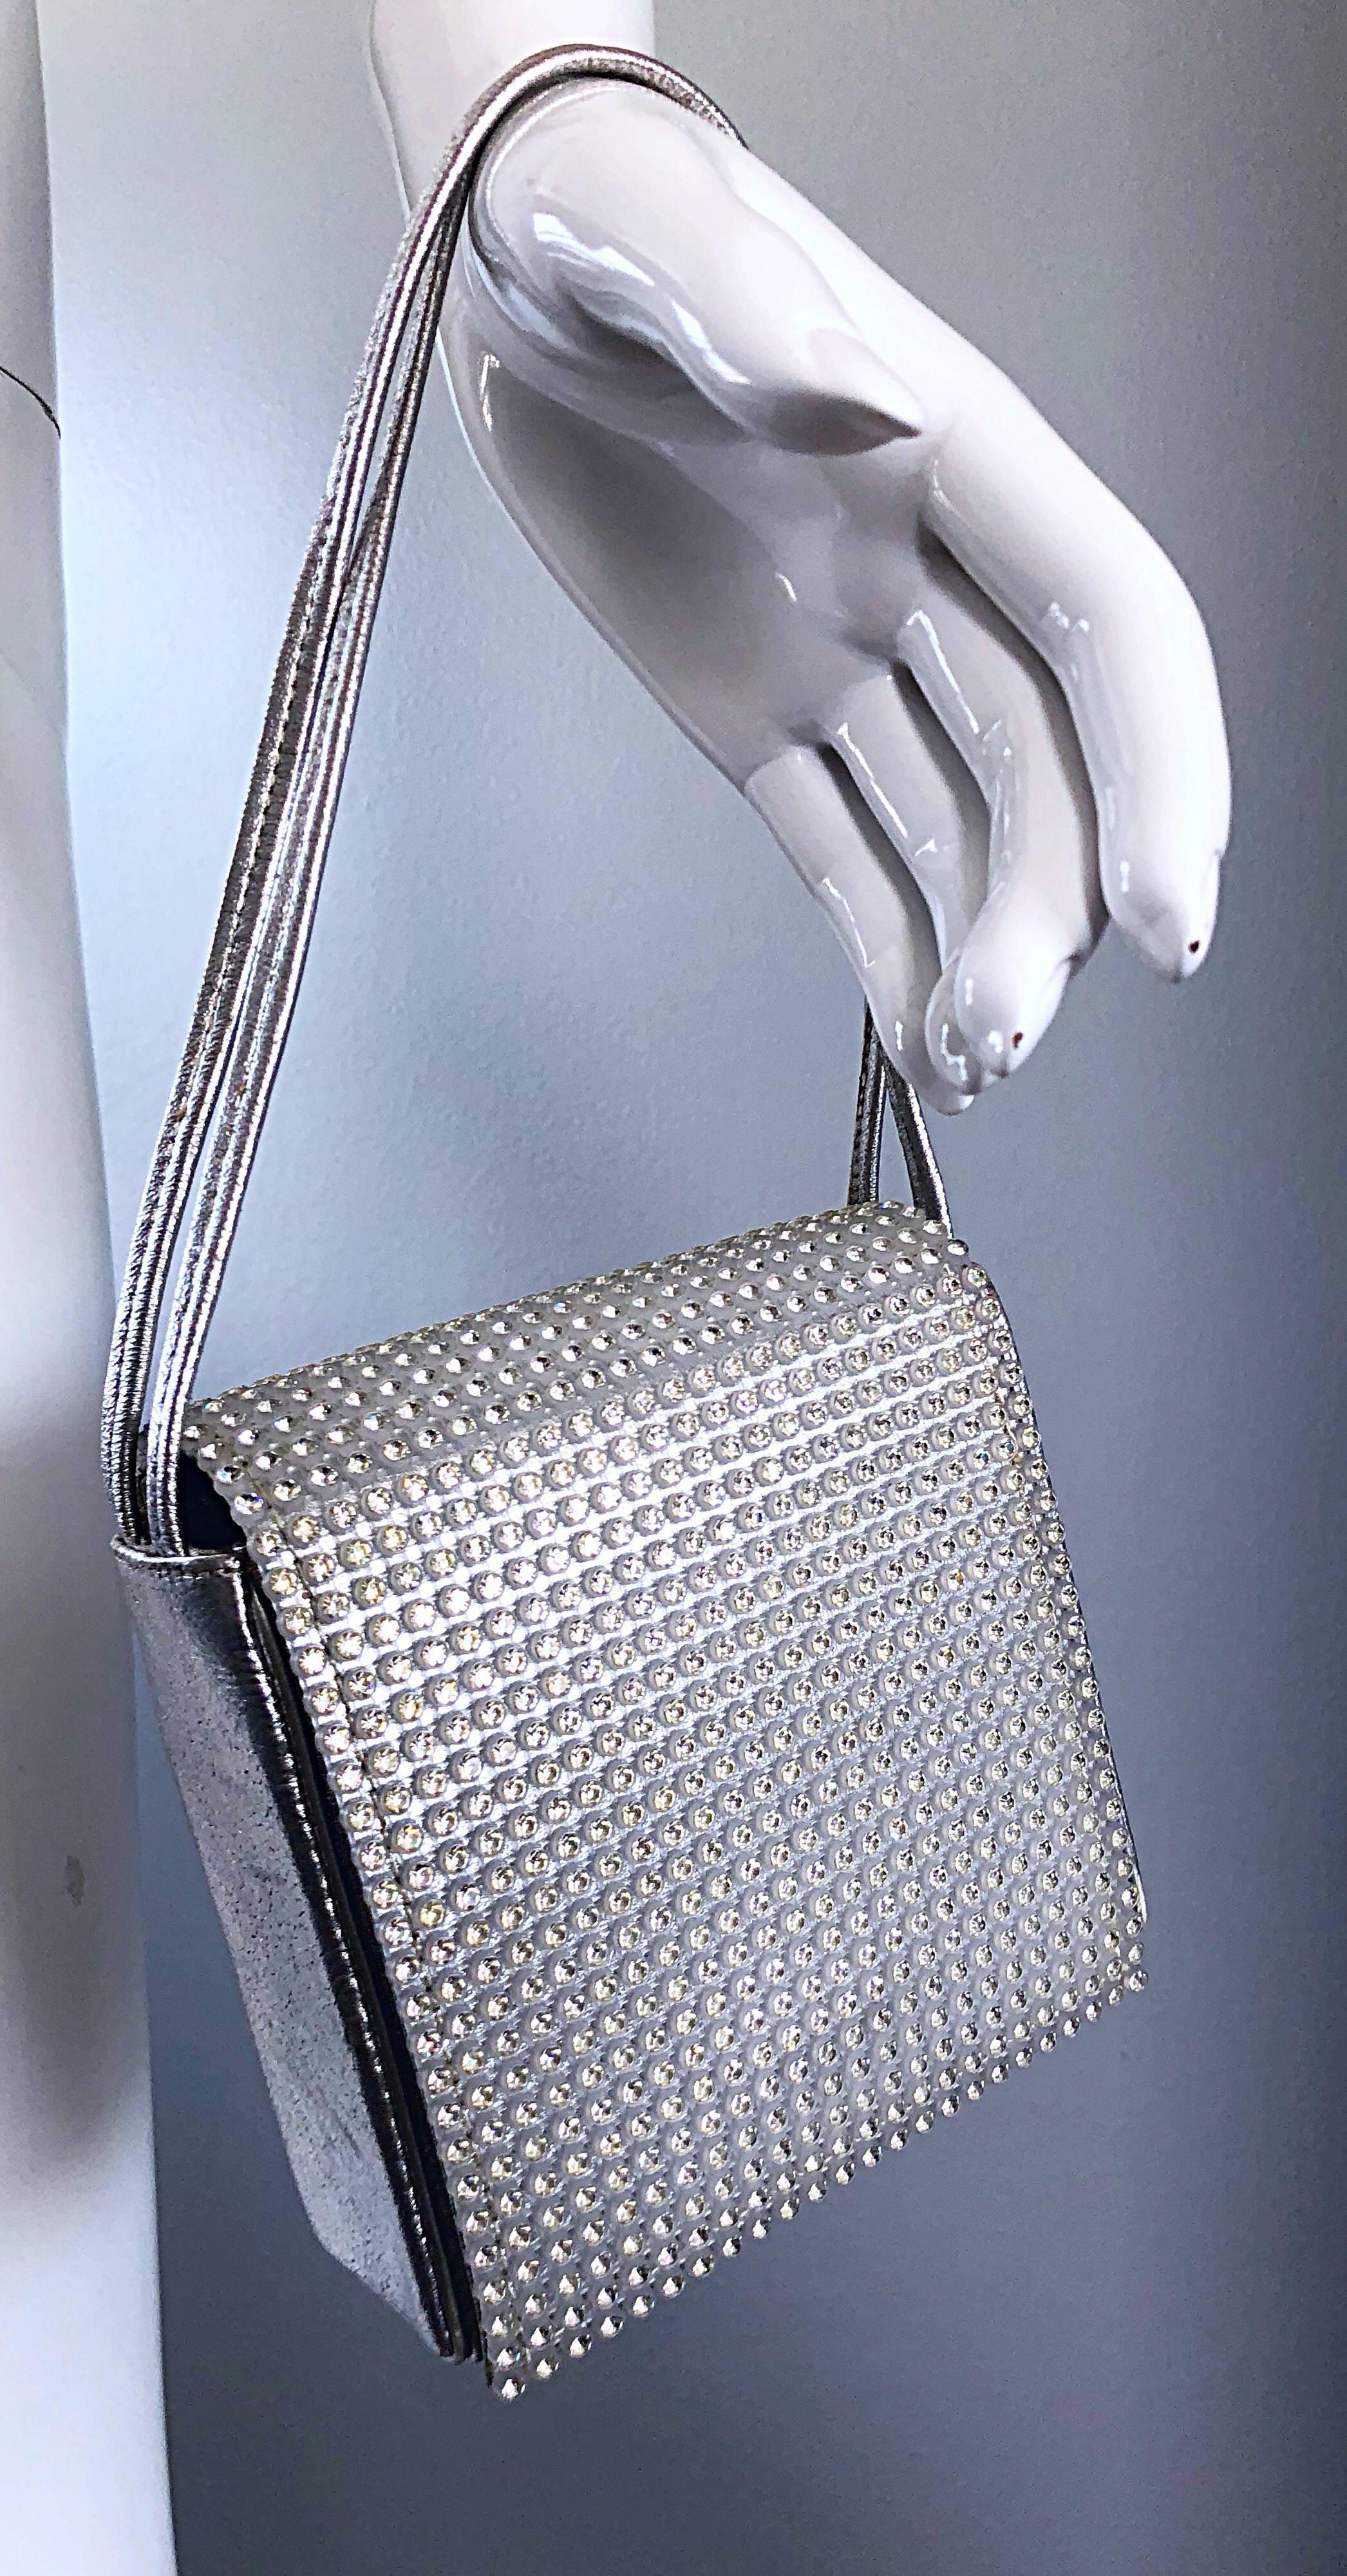 Beautiful 60s vintage WALBORG silver leather rhinestone crystal encrusted evening handbag ! Walborg was the go-to purse designer for starlets such as Rita Hayworth, Marilyn Monroe, Jayne Mansfield, etc. The quality actually equaled the beauty of the